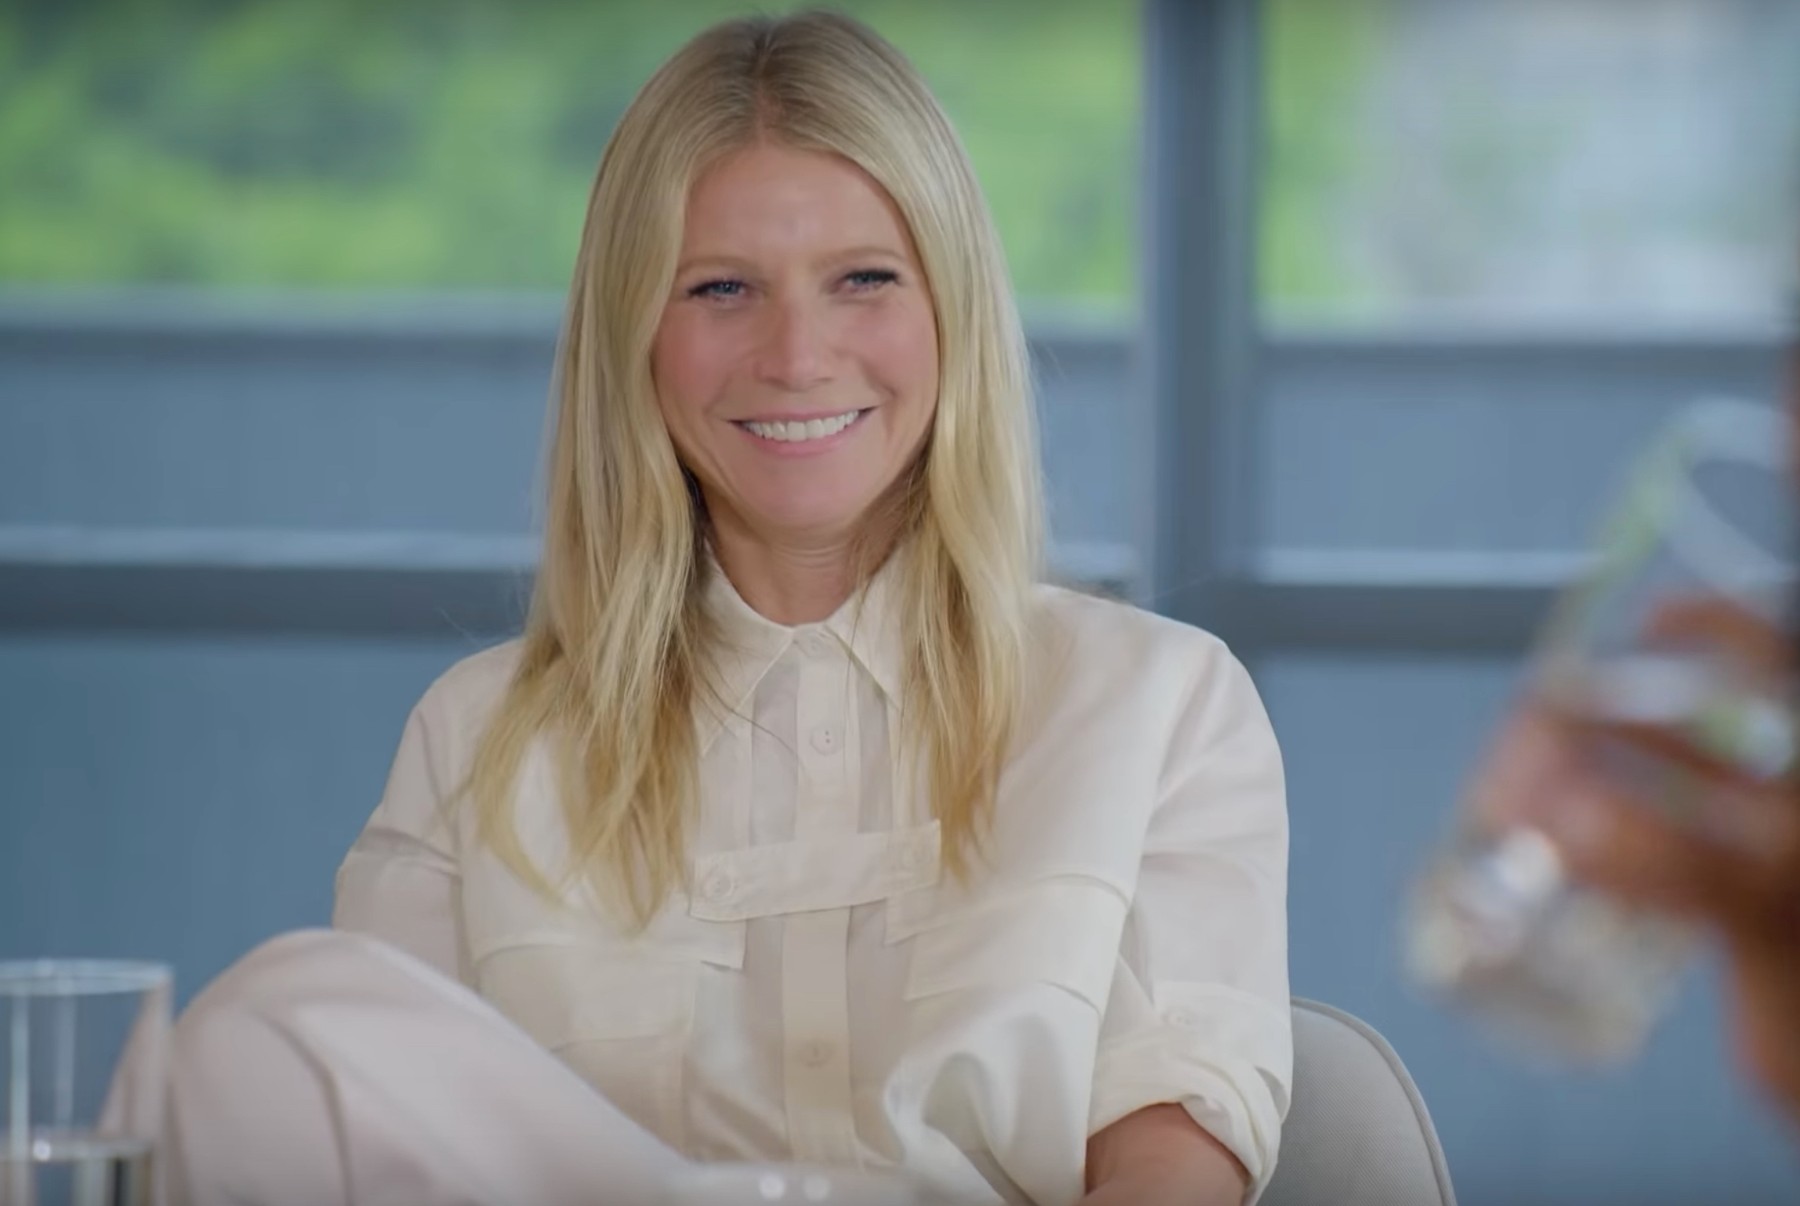 Non Exclusive: ***NO MAIL ONLINE UNLESS AGREED***Here's Gwyneth Paltrow looking shocked at her skin as she undergoes a facial in a trailer for her new Netflix show. 
The actress holds a mirror to her face in horror in the promotional clip for The Goop Lab, set to hit screens later this month.
The trailer for the six-episode Netflix programme features female orgasms, a woman checking out her own private parts with a mirror and a lamp, and energy healing that ends in exorcisms.
At one point she asks an orgasm specialist about what happens in her workshops.
“What the f*ck are you doing to people?” Paltrow, 47, says. 
“Naked in a room with a bunch of women? I don’t know if I have the guts.”
The show is hosted by Paltrow, the founder of Goop, and company CCO, Elise Loehnen, who can be seen undergoing several procedures, including acupuncture. 
The series premieres on streaming service Netflix on January 24.
It will feature a team of researchers, doctors and alternative health practitioners to discuss their experiences with various wellness practices.

-------

DISCLAIMER:

BEEM does not claim any Copyright or License in the attached material. Any downloading fees charged by BEEM are for BEEM's services only, and do not, nor are they intented to, convey to the user any Copyright or License in the material. By publshing this material, the user expressly agrees to indemnify and to hold BEEM harmless from any claims, demands, or causes of action arising out of or connected in any way with user's publication of the material., Image: 491350644, License: Rights-managed, Restrictions: -UNITED_STATES_OF_AMERICA, MANDATORY CREDIT OR DOUBLE FEE WILL BE CHARGED - **Strictly no use in repeat online galleries without payment**, Model Release: no, Credit line: Netflix / BEEM / Beem / Profimedia